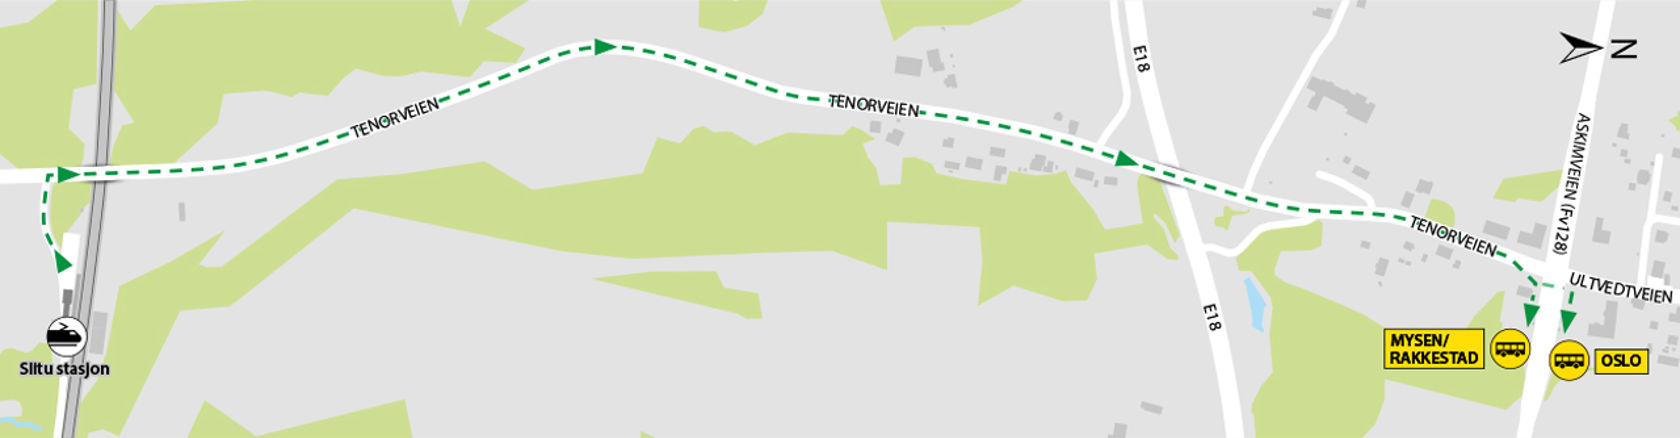 Map shows rail replacement service departs from bus stops Slitu located in Askimveien (Fv128).